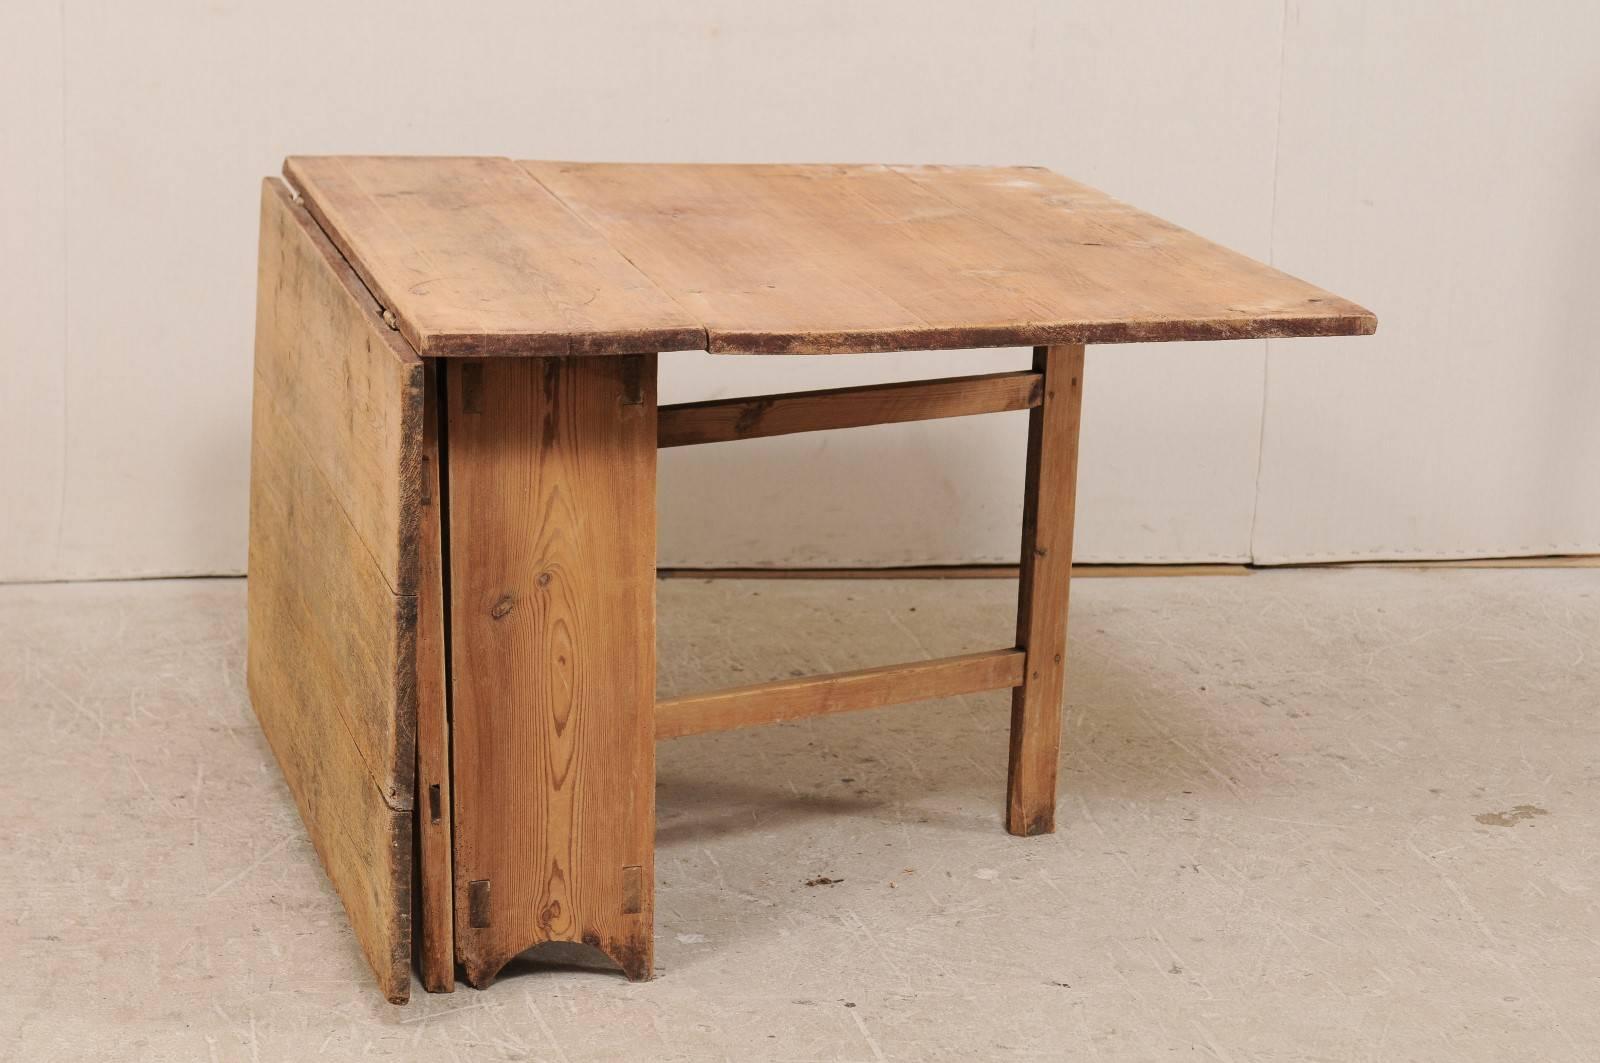 Rustic Swedish Early 19th Century Drop-Leaf / Gate Leg Table with Original Wood Finish For Sale